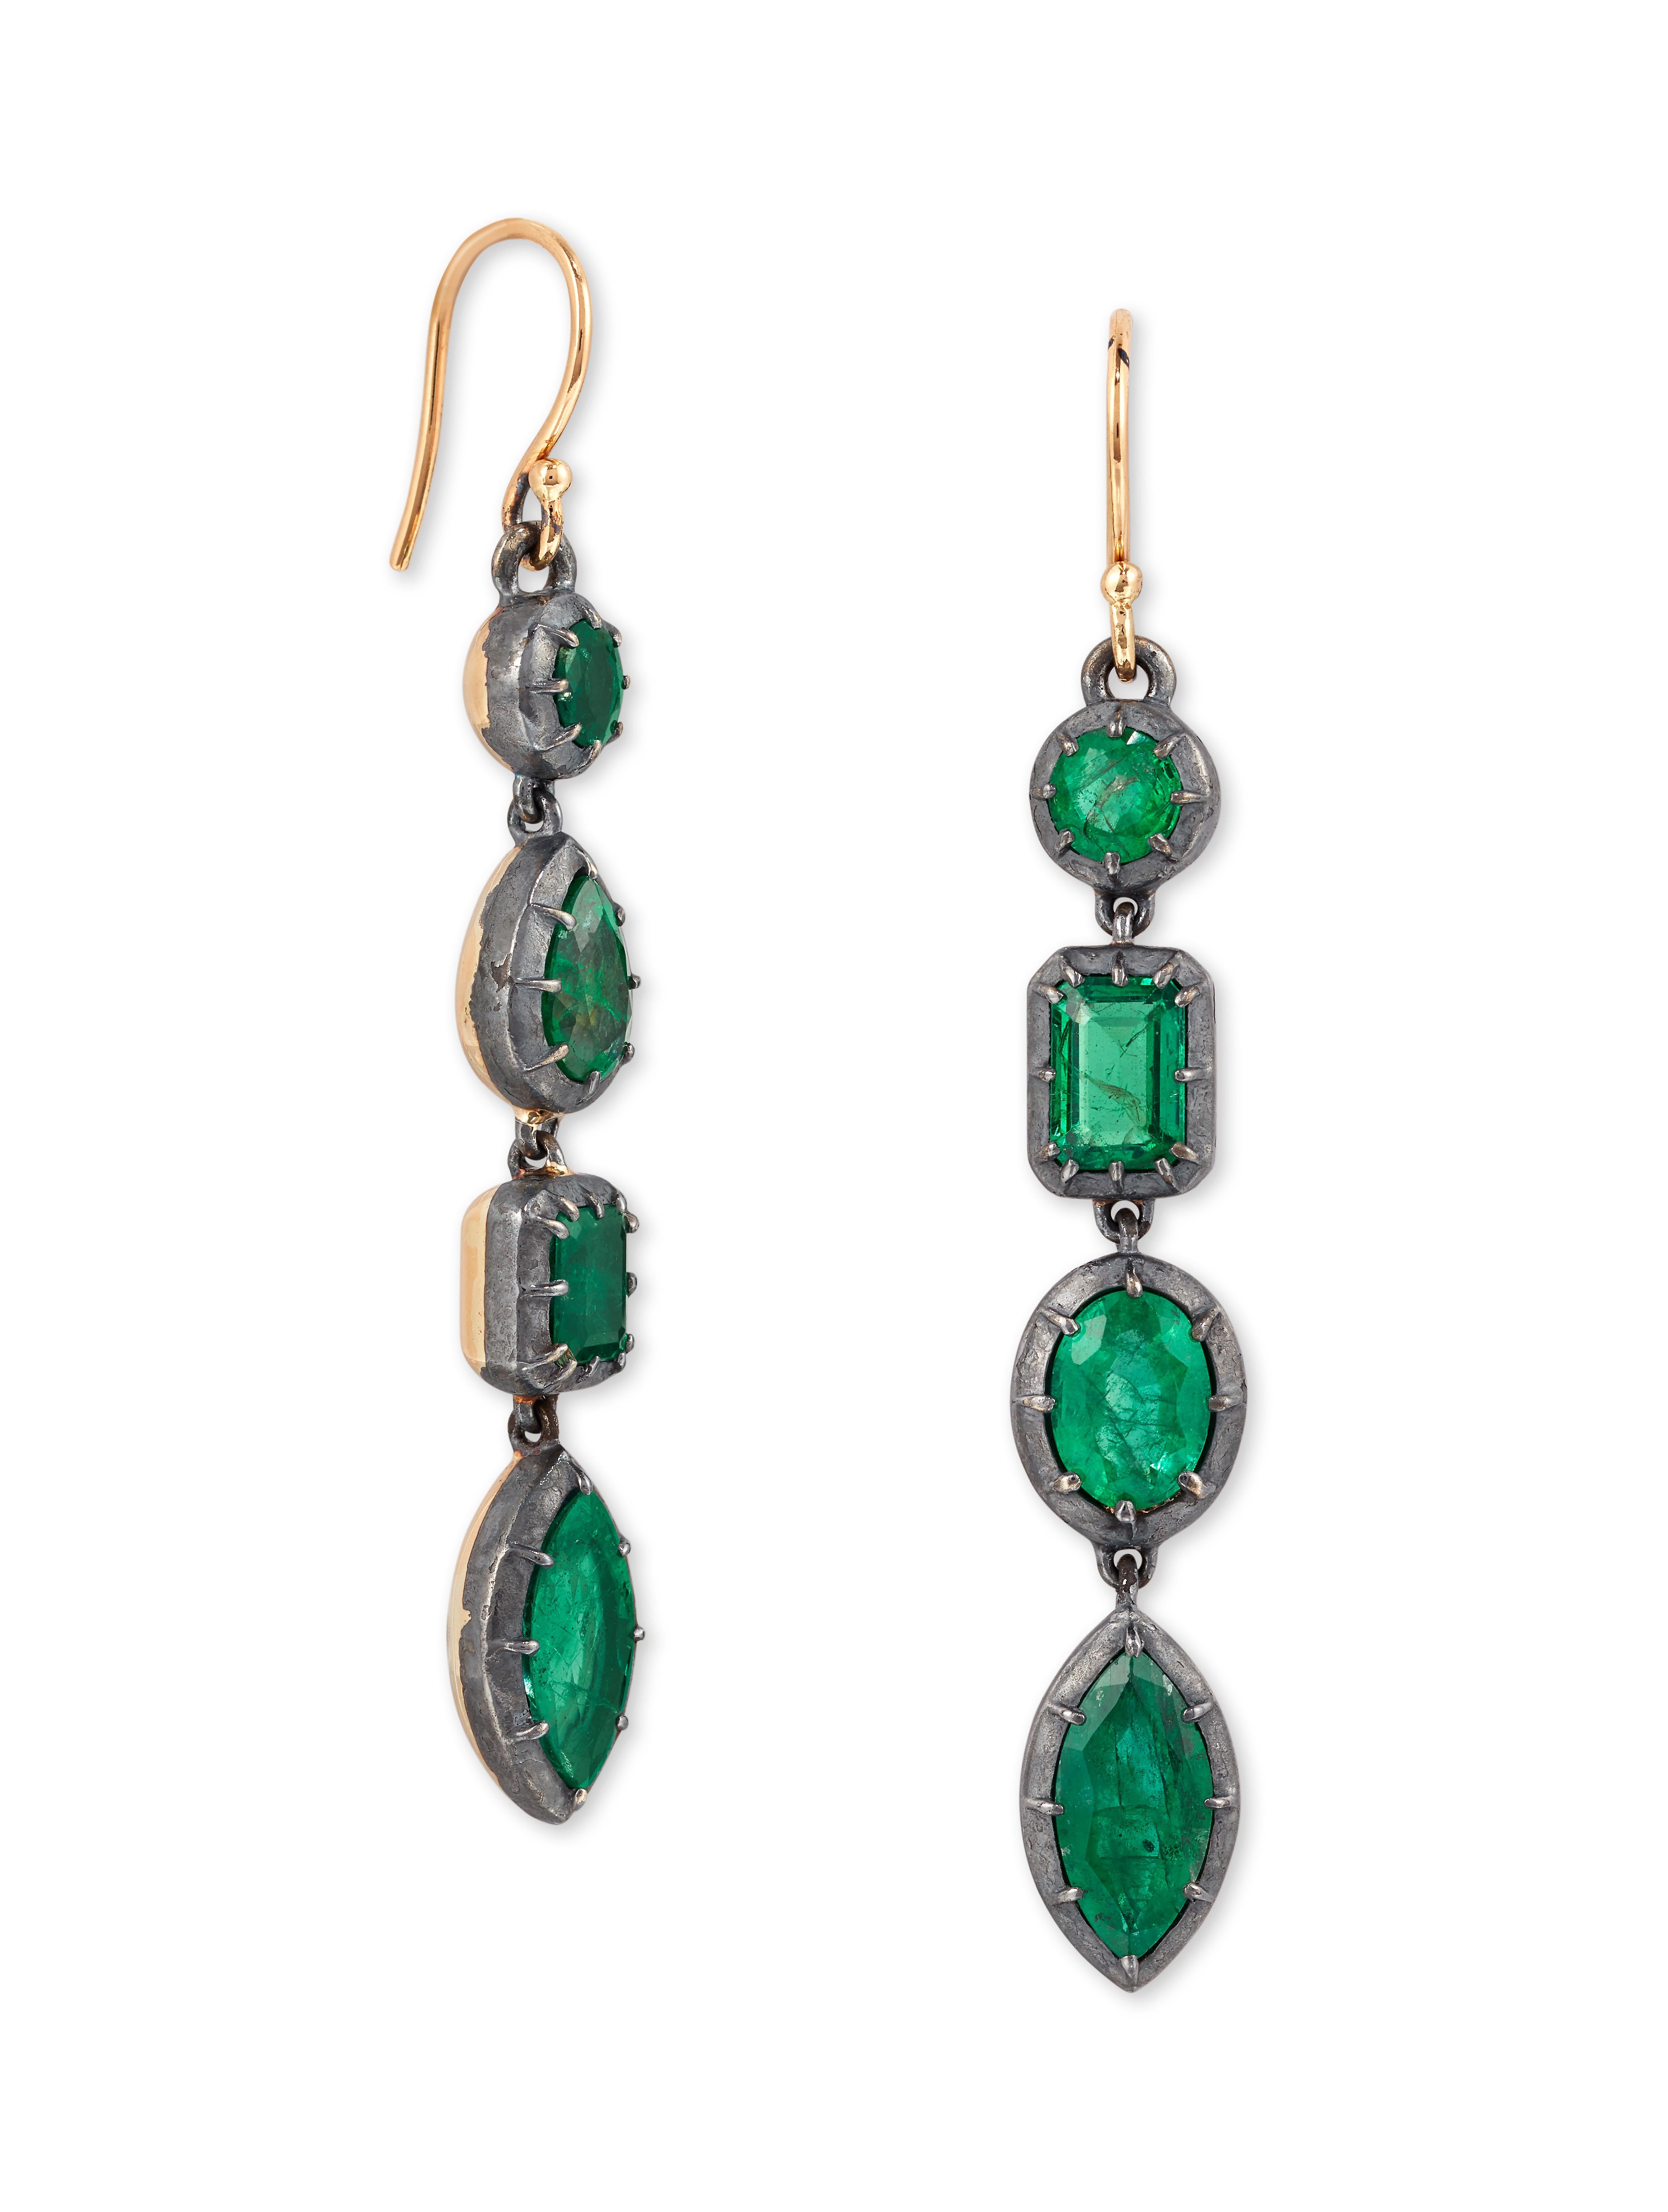 A Beautiful Pair of Emerald Earrings.

Composed of a line of collet set Oval, Square, Marquise and Pair shape Emeralds, with hook fittings mounted in Silver and 18ct gold.